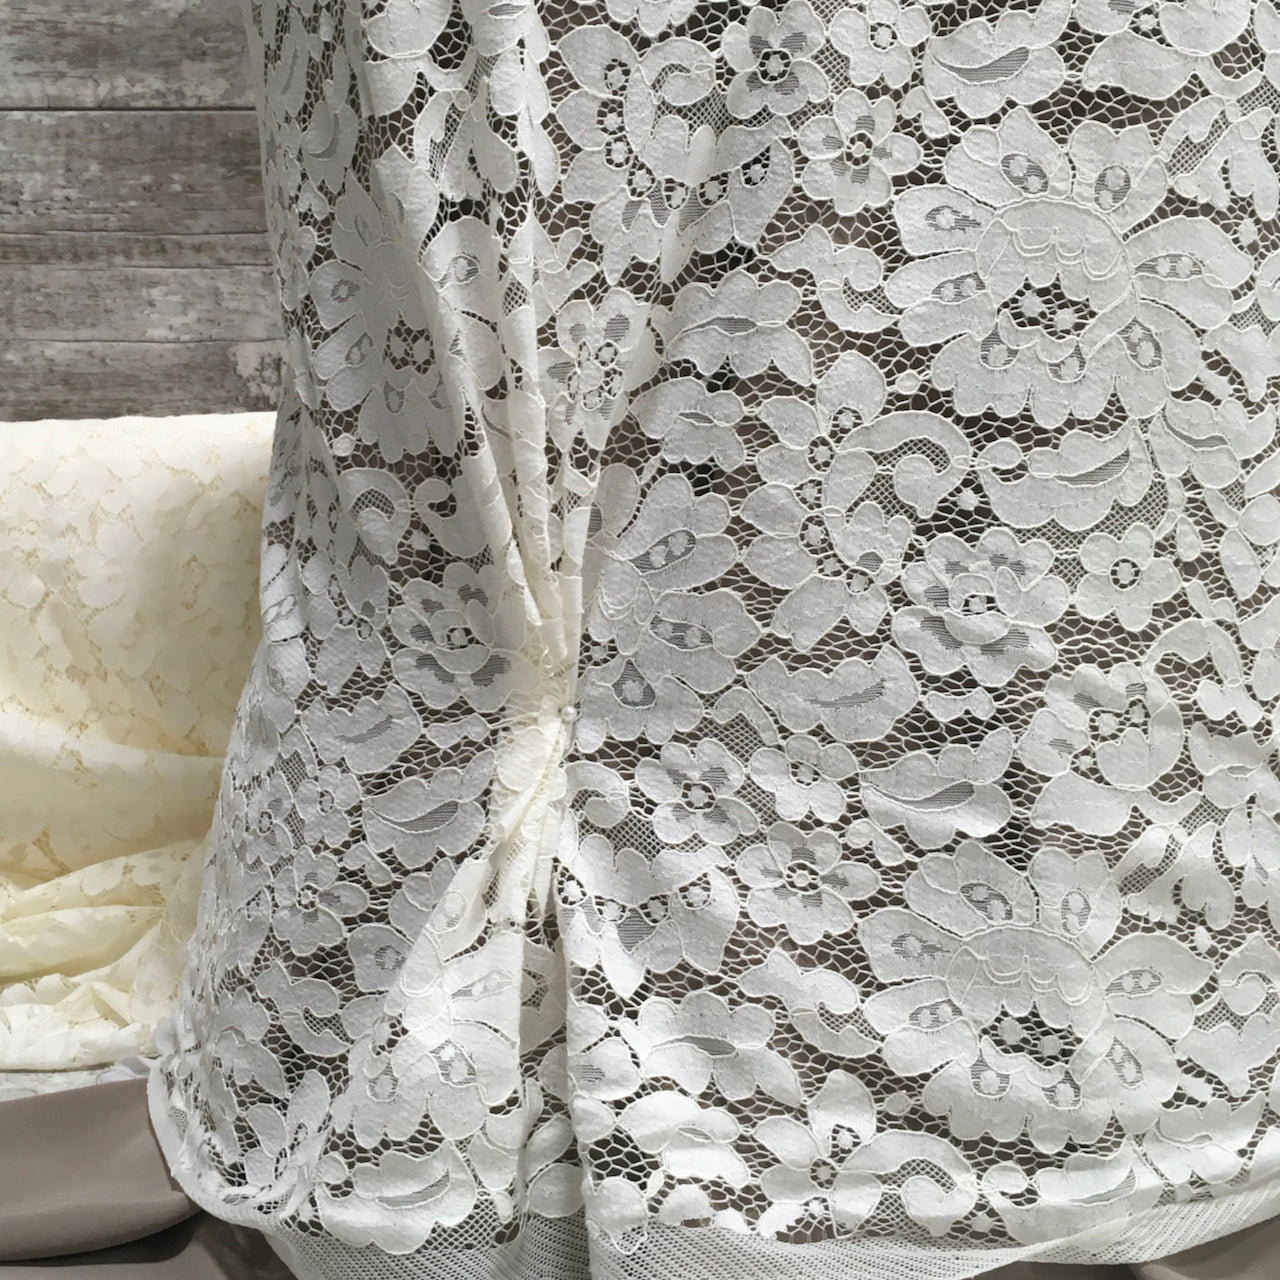 Valentino Lace / Oyster - Sold by the half yard